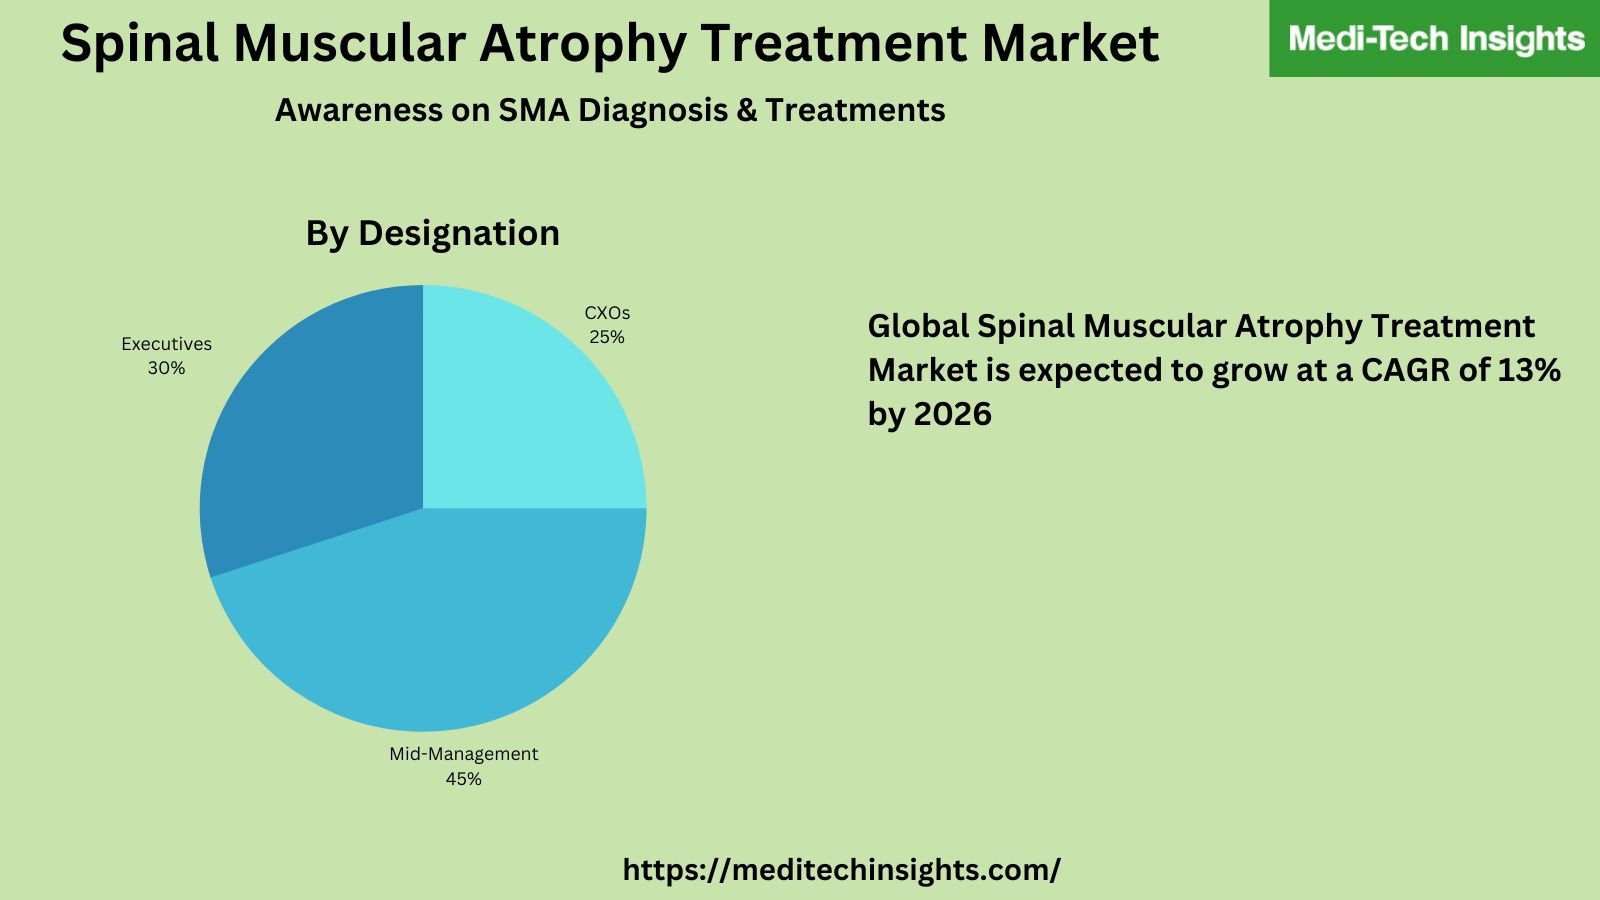 Global Spinal Muscular Atrophy Treatment Market is anticipated to grow at a CAGR of ~13% by 2026